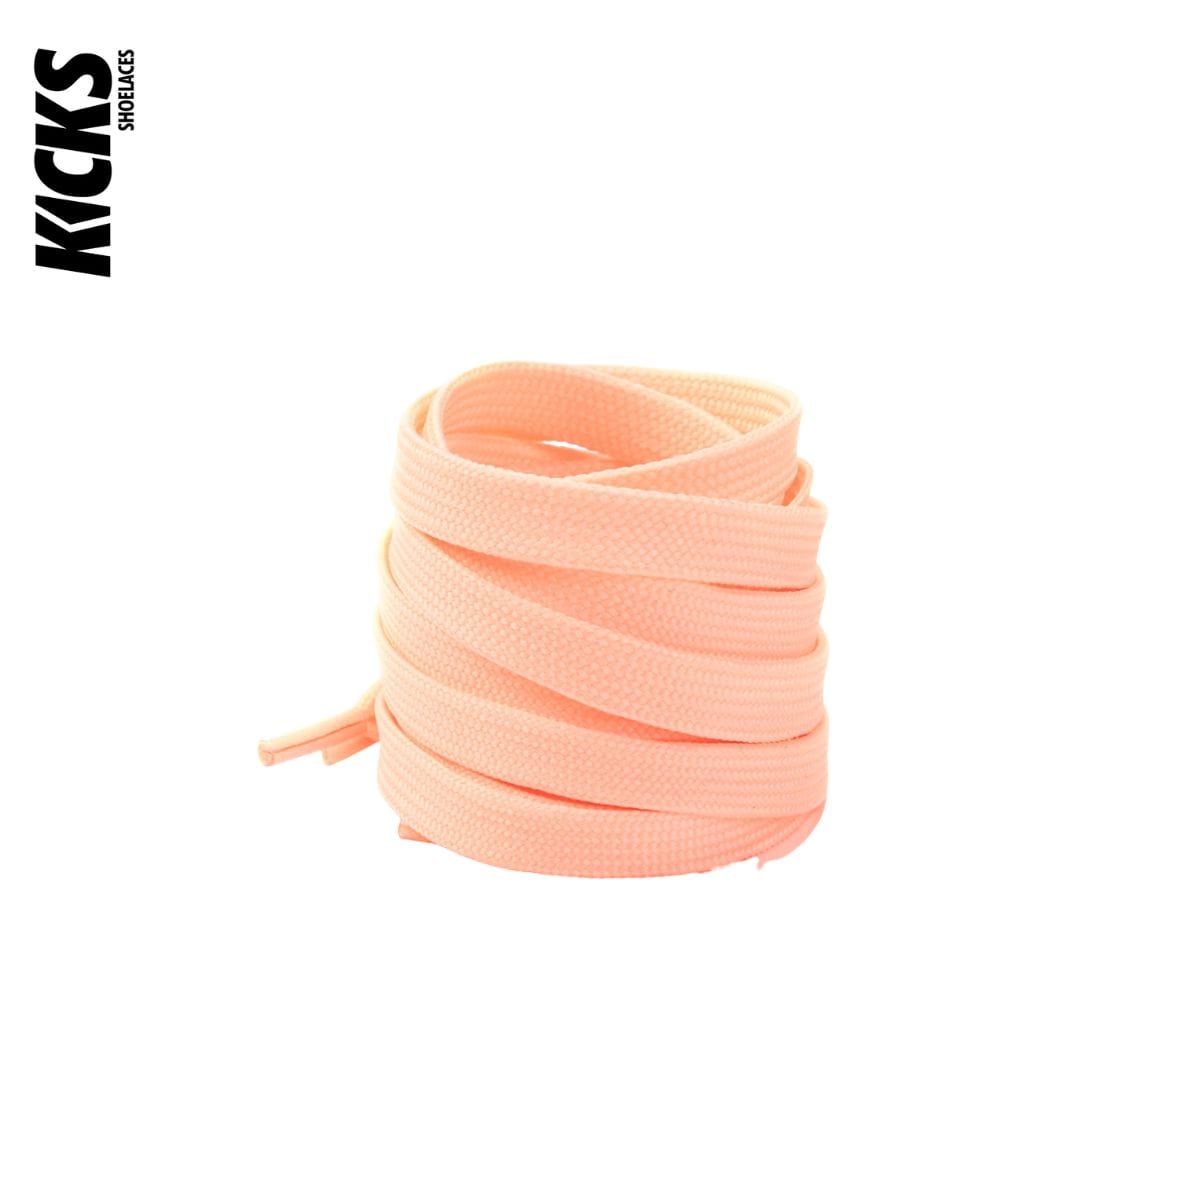 Peach Replacement Shoe Laces for Adidas NMD Sneakers by Kicks Shoelaces